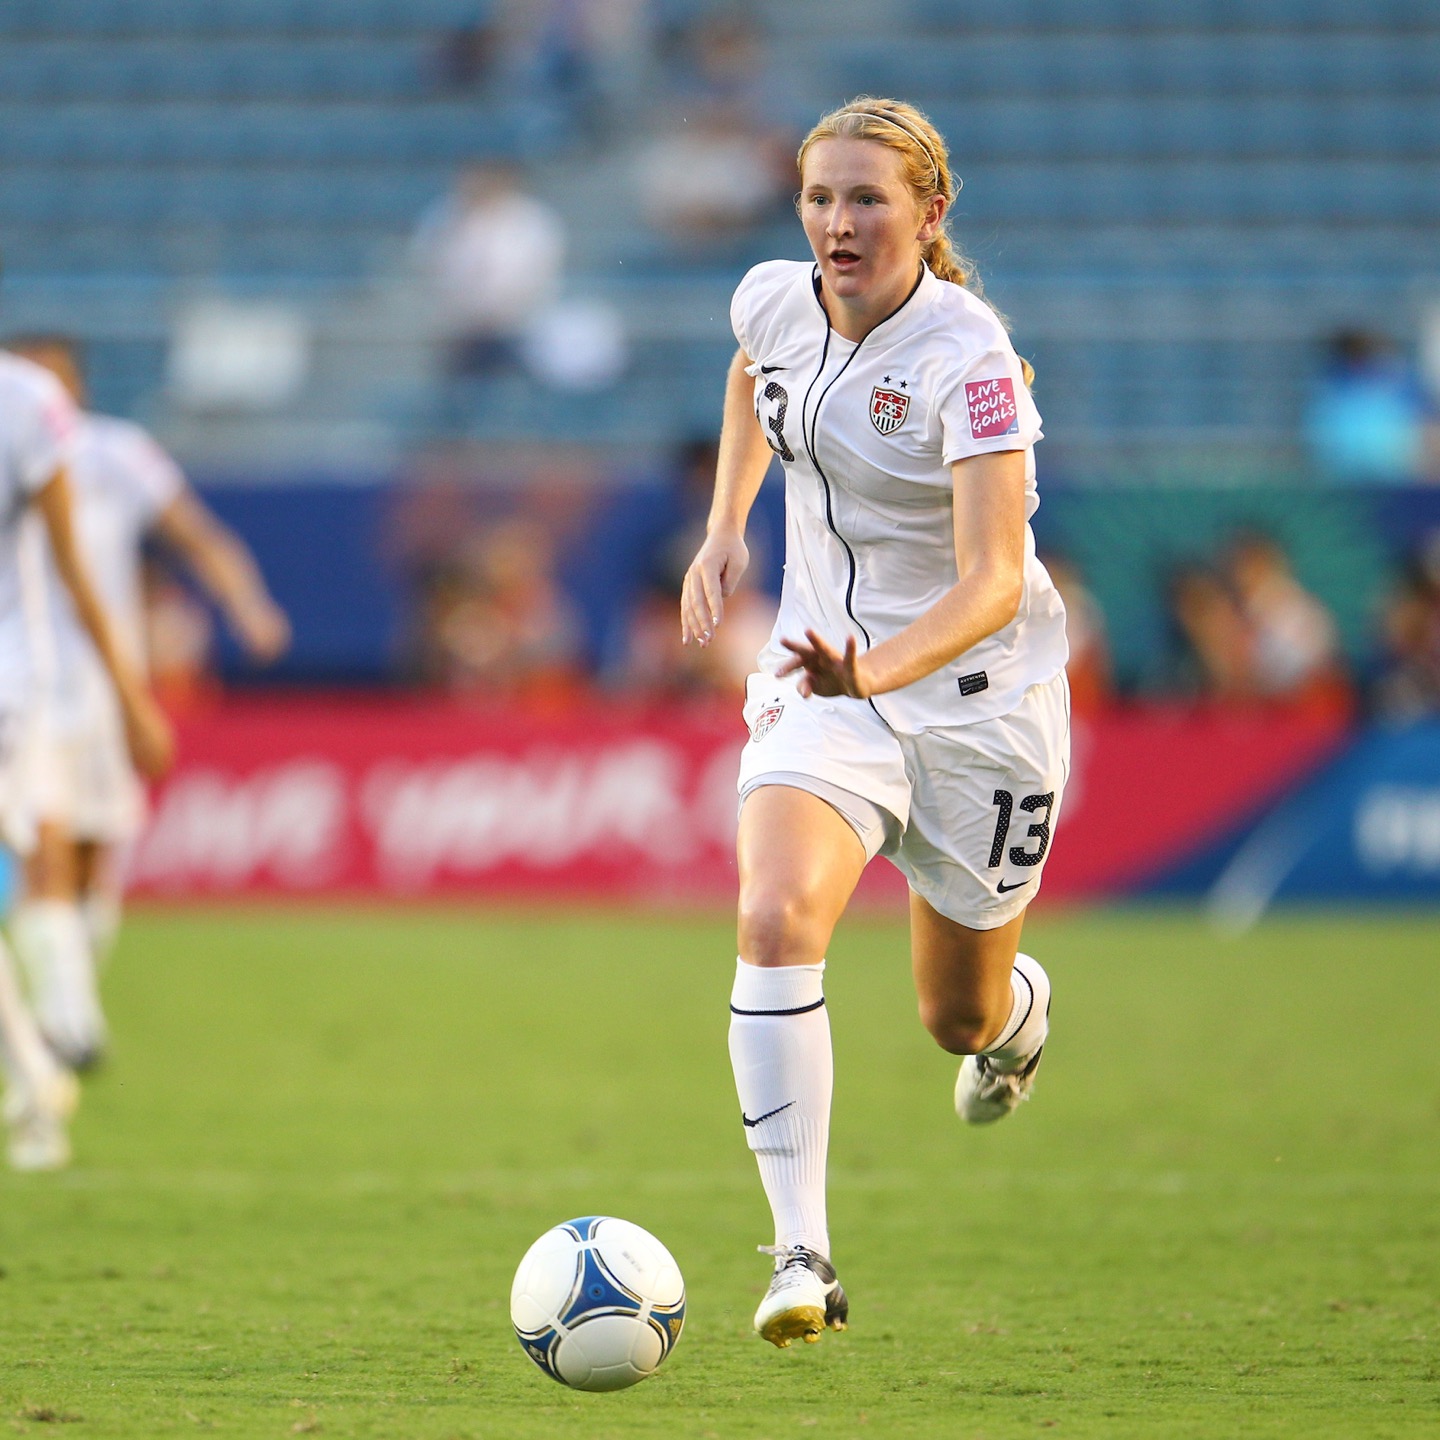 Samantha Mewis Voted 2020 U.S. Soccer Female Player of the Year